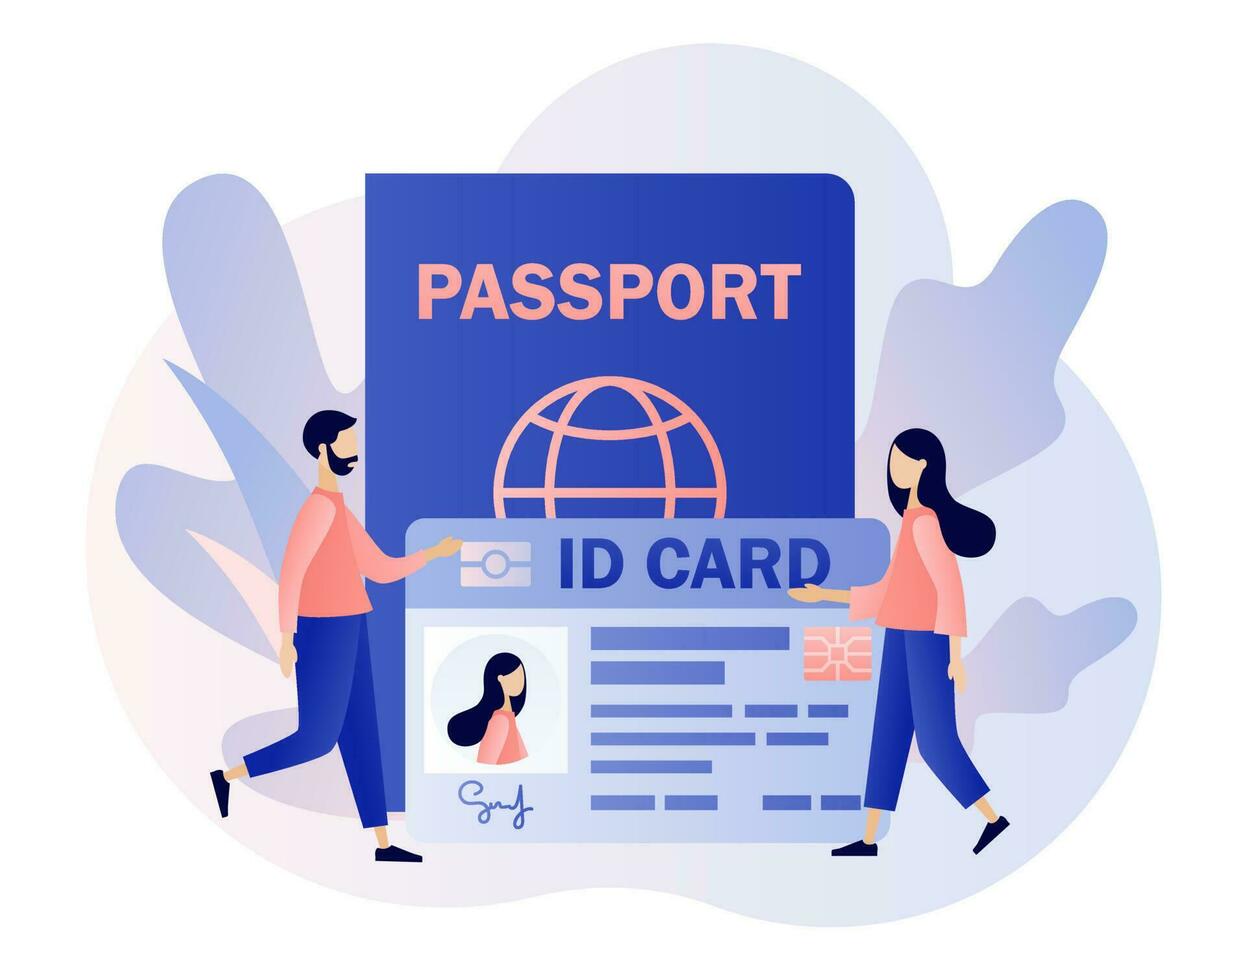 Smart ID card concept. Tiny people and Biometric documents. Digital passport and Driver license. Electronic identity card. Modern flat cartoon style. Vector illustration on white background